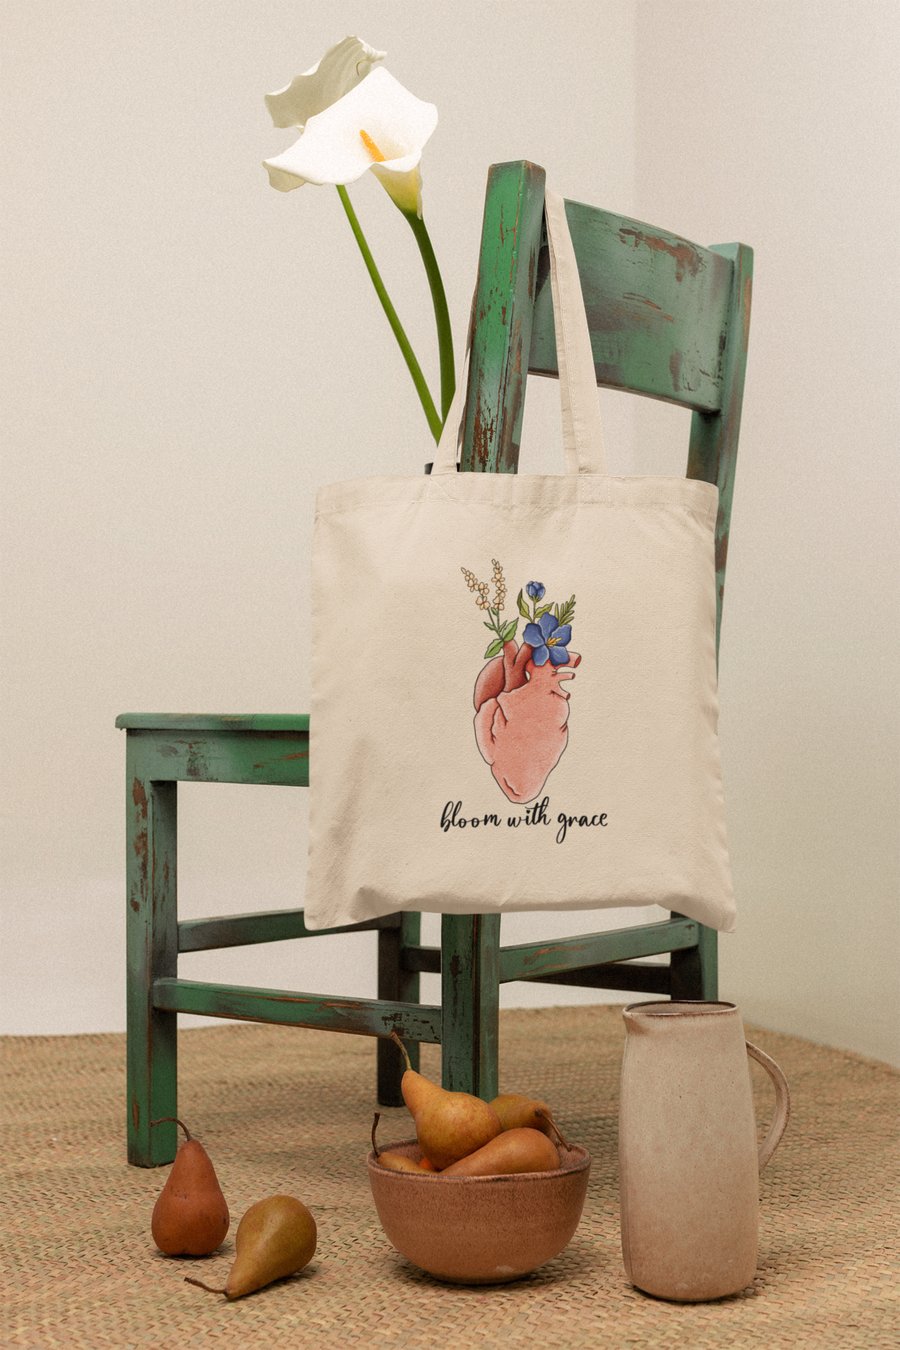 Bloom with grace tote bag, Handmade tote bag, 100% Cotton